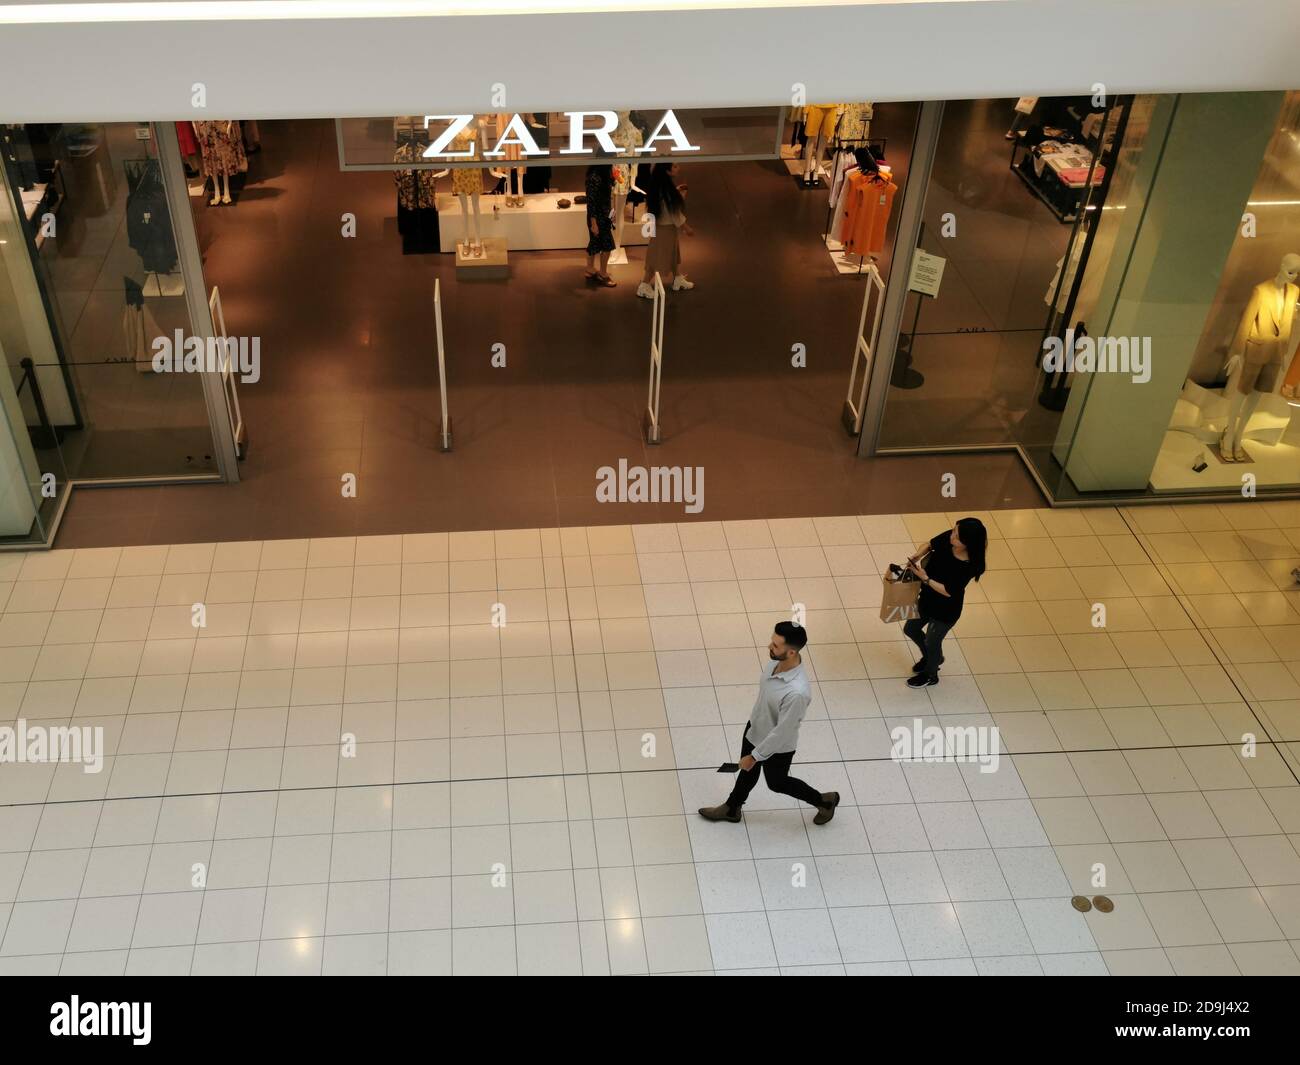 Page 3 - Zara Shop Front High Resolution Stock Photography and Images -  Alamy